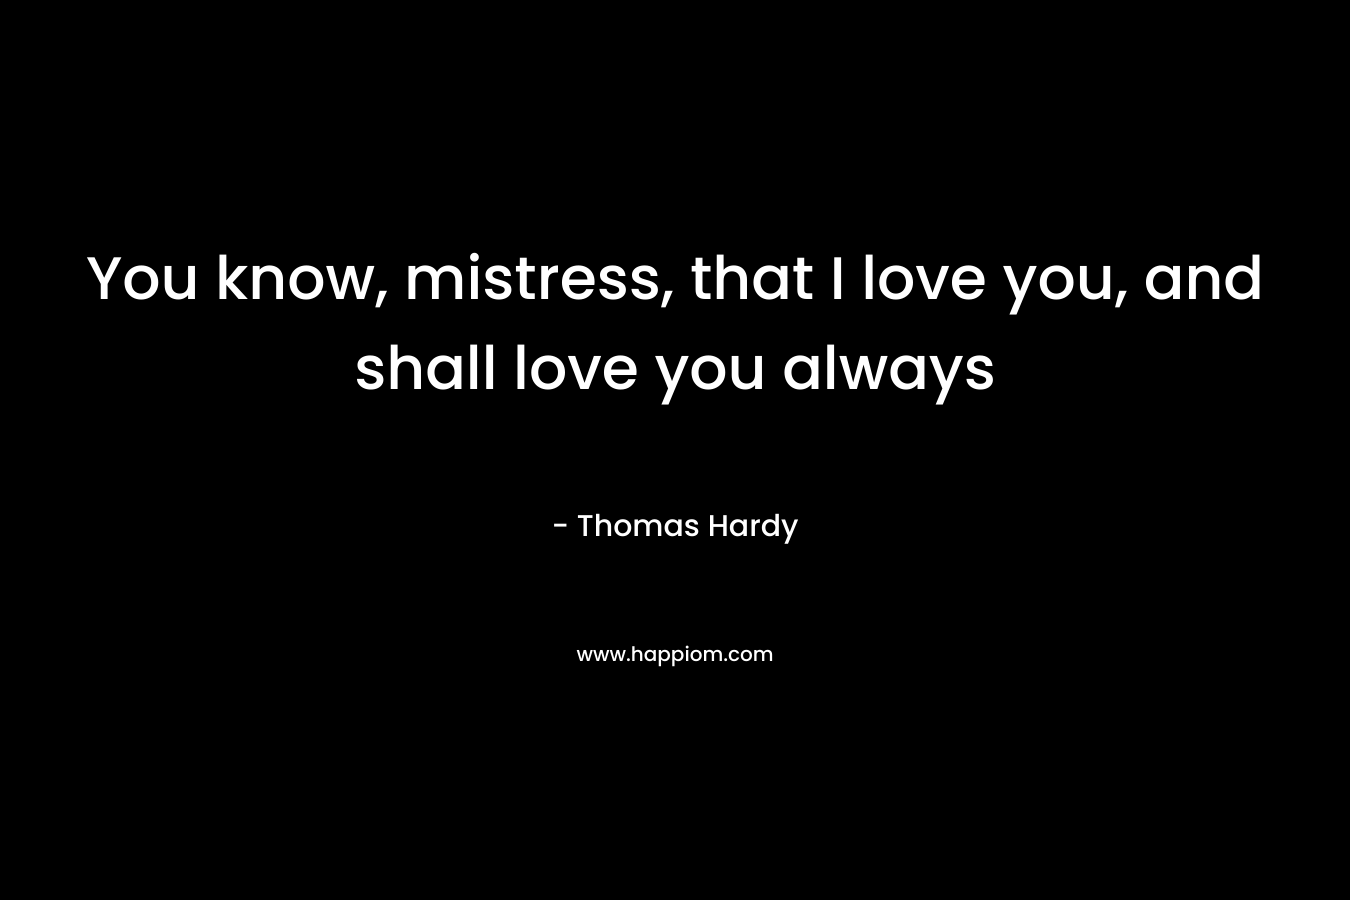 You know, mistress, that I love you, and shall love you always – Thomas Hardy